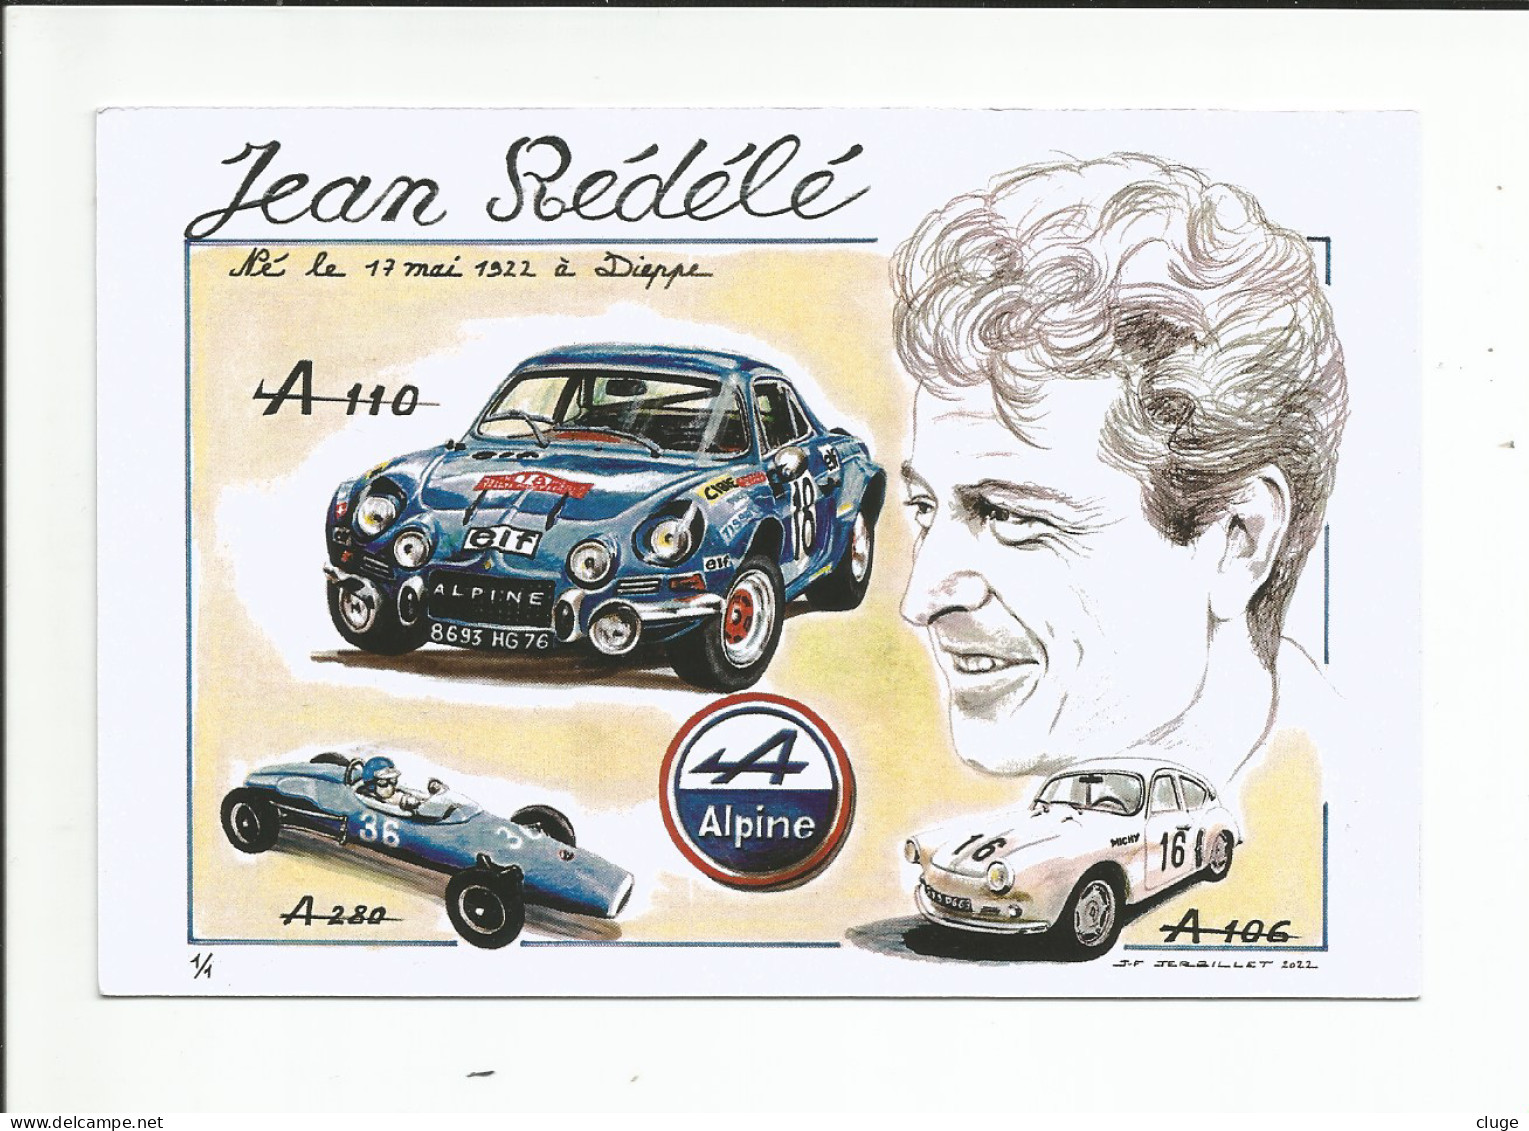 ALPINE  -  A 106 / A 110 / A 280 --  JEAN REDELE - Rally Racing